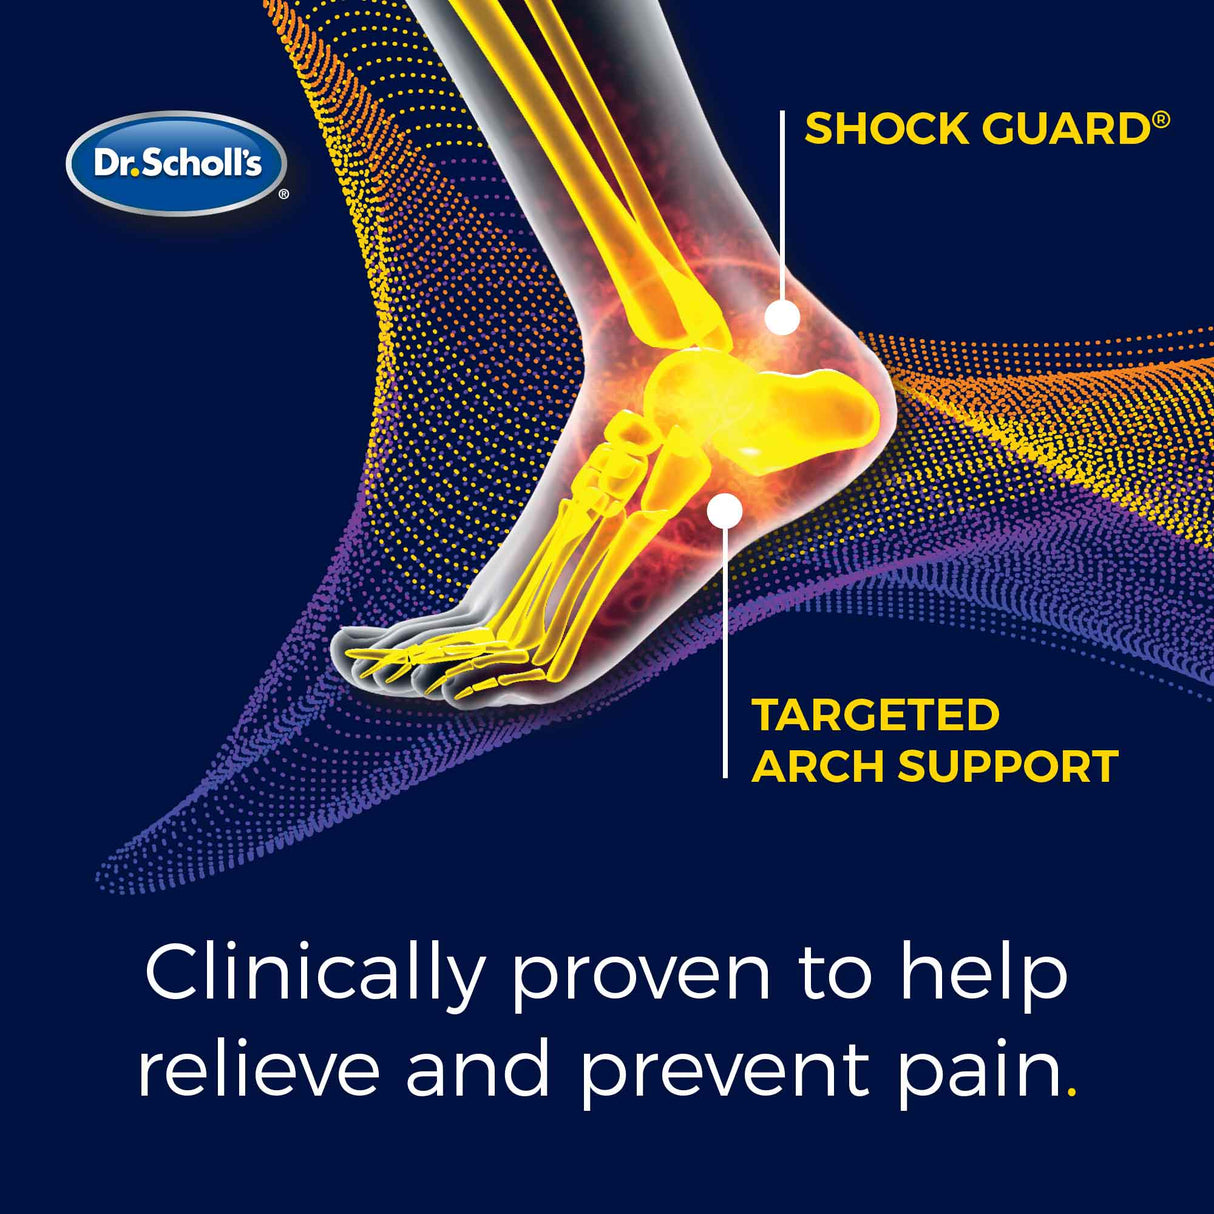 plantar fasciitis sized to fit insoles are clinically proven to help relieve and prevent pain